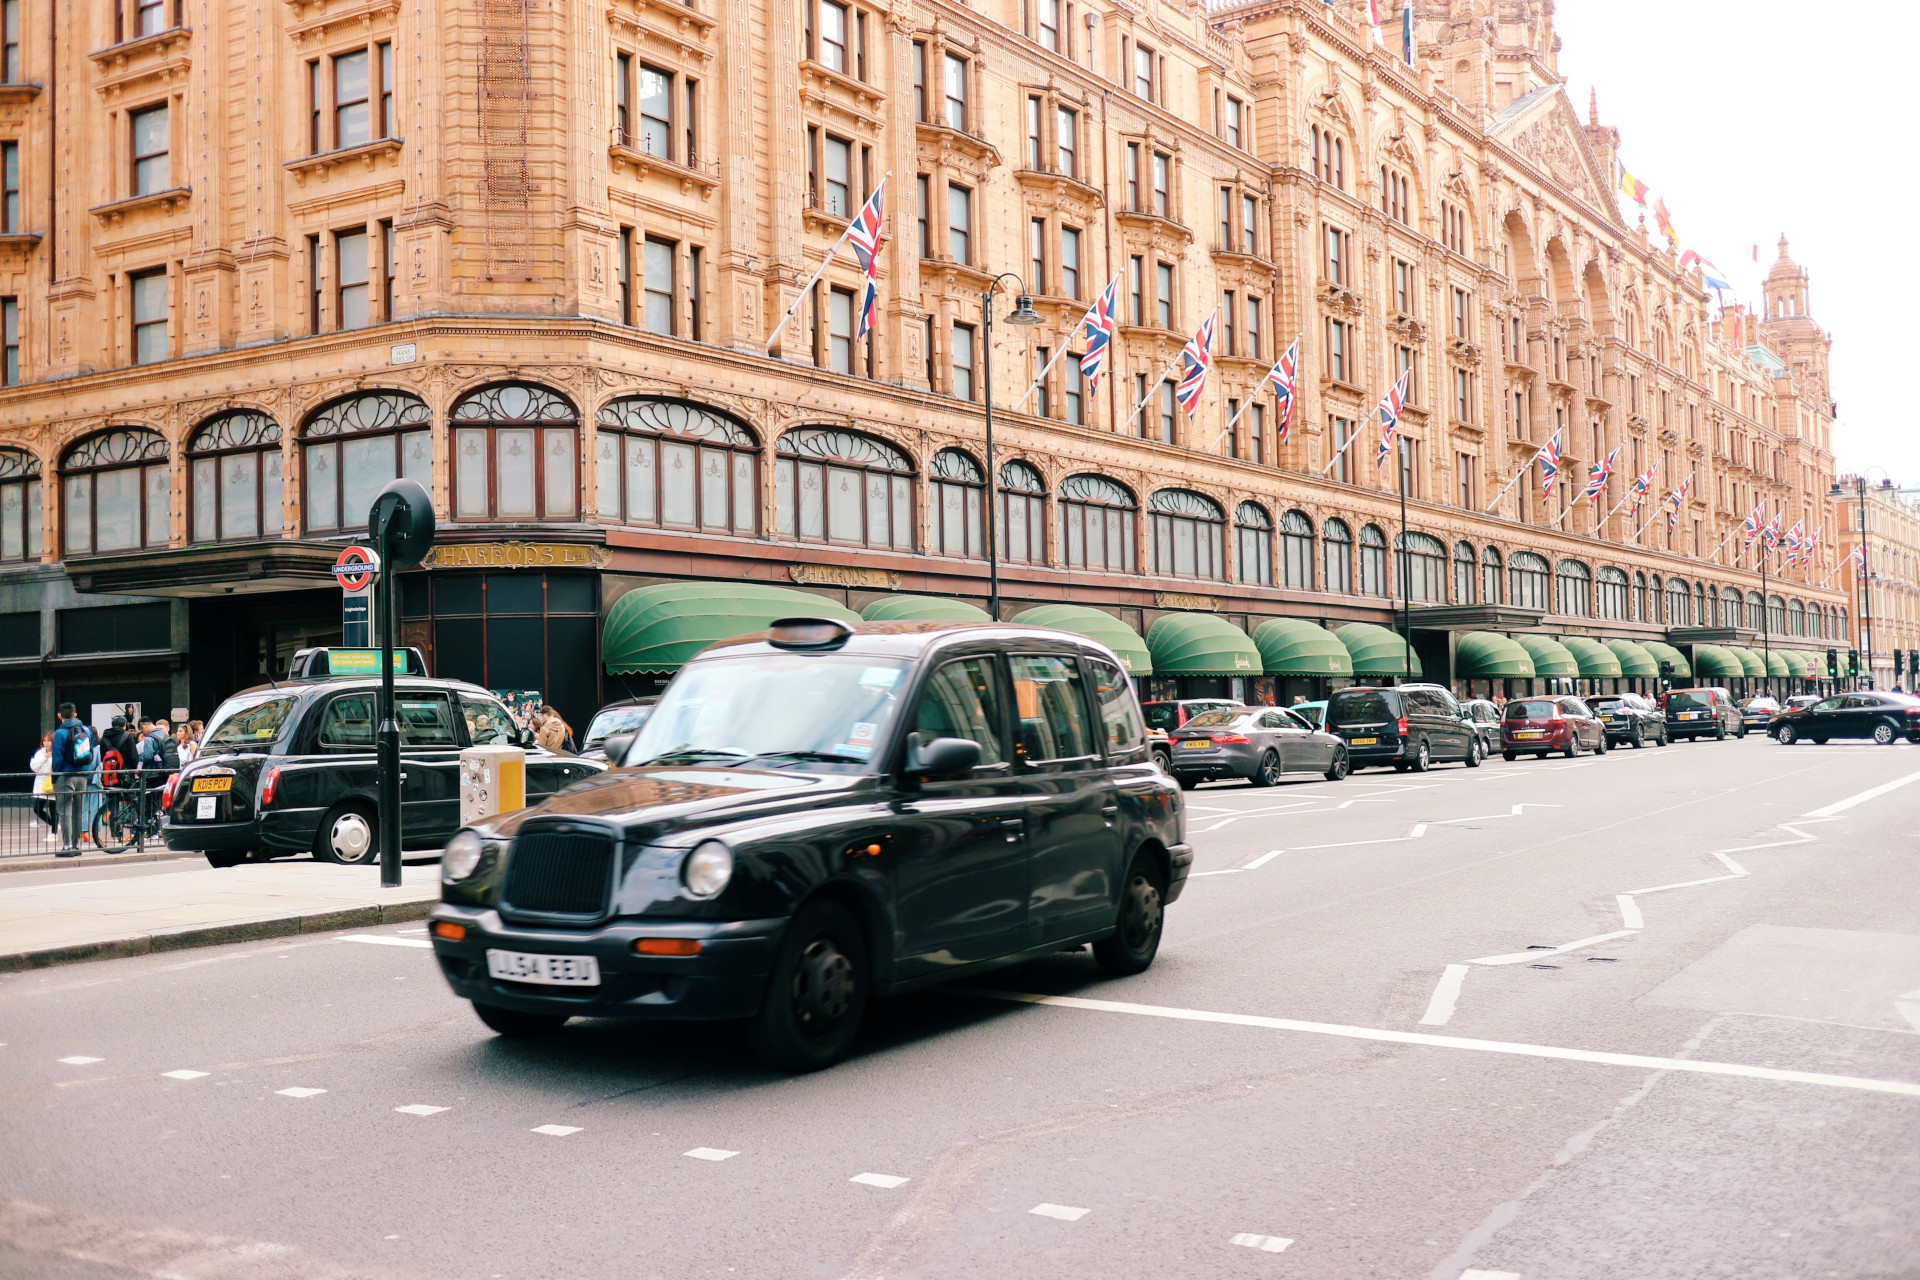 Harrods exterior from street view, with London taxi driving past